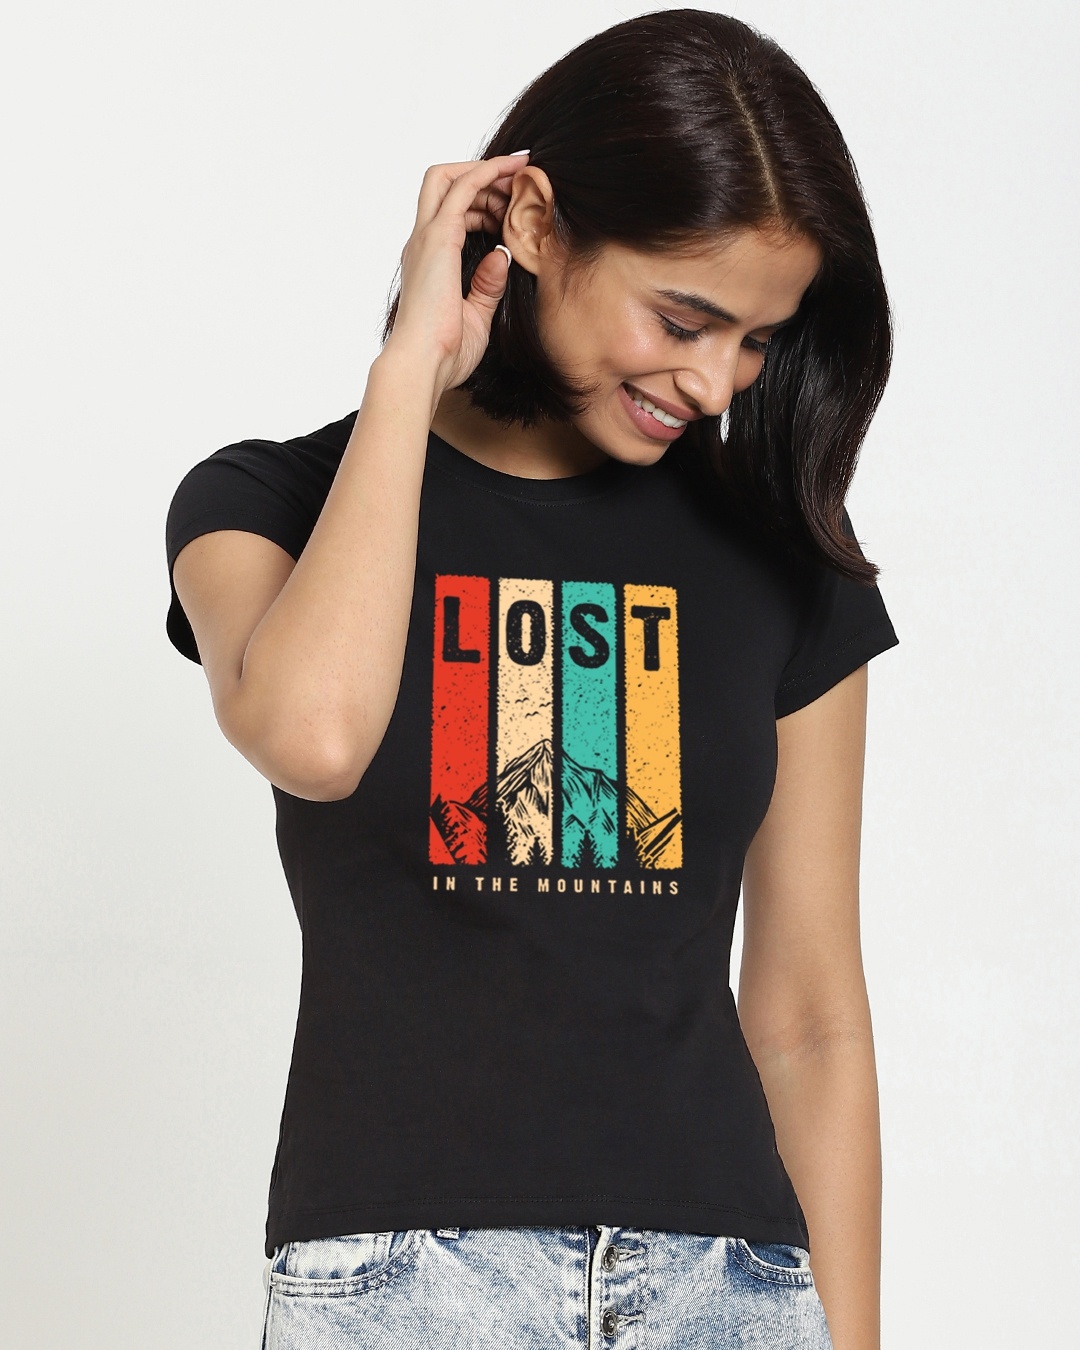 Shop Women's Black Lost in the Mountains Slim Fit T-shirt-Front